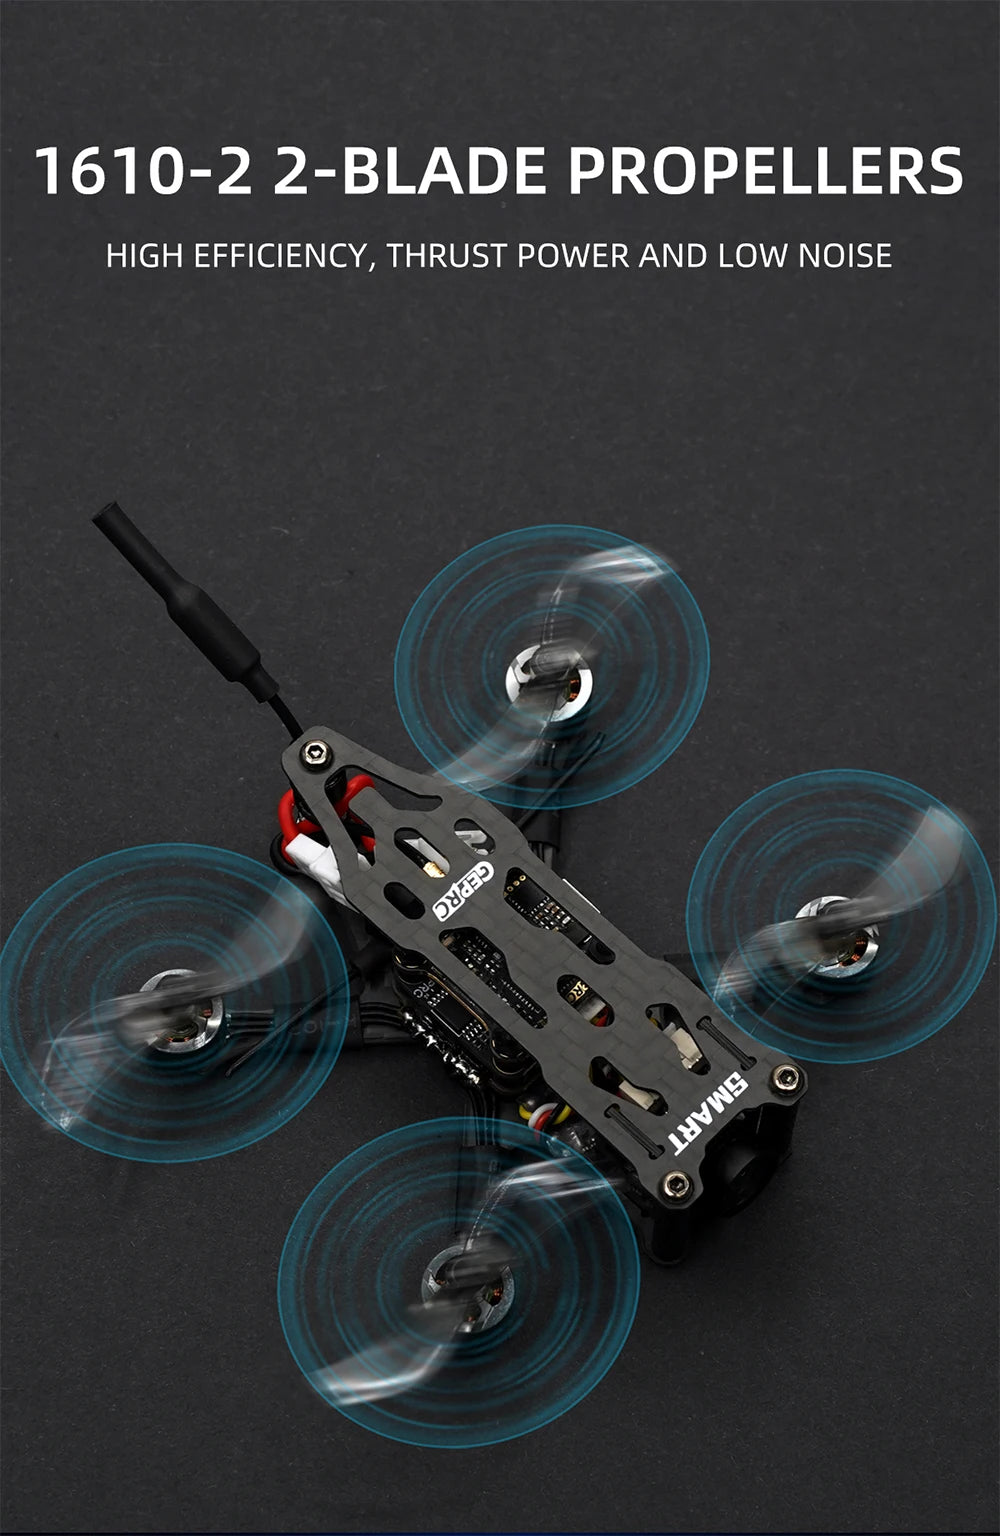 GEPRC SMART16 Freestyle FPV, Q8a35 INVWS HIGH EFFICIENCY, THRUST POWER